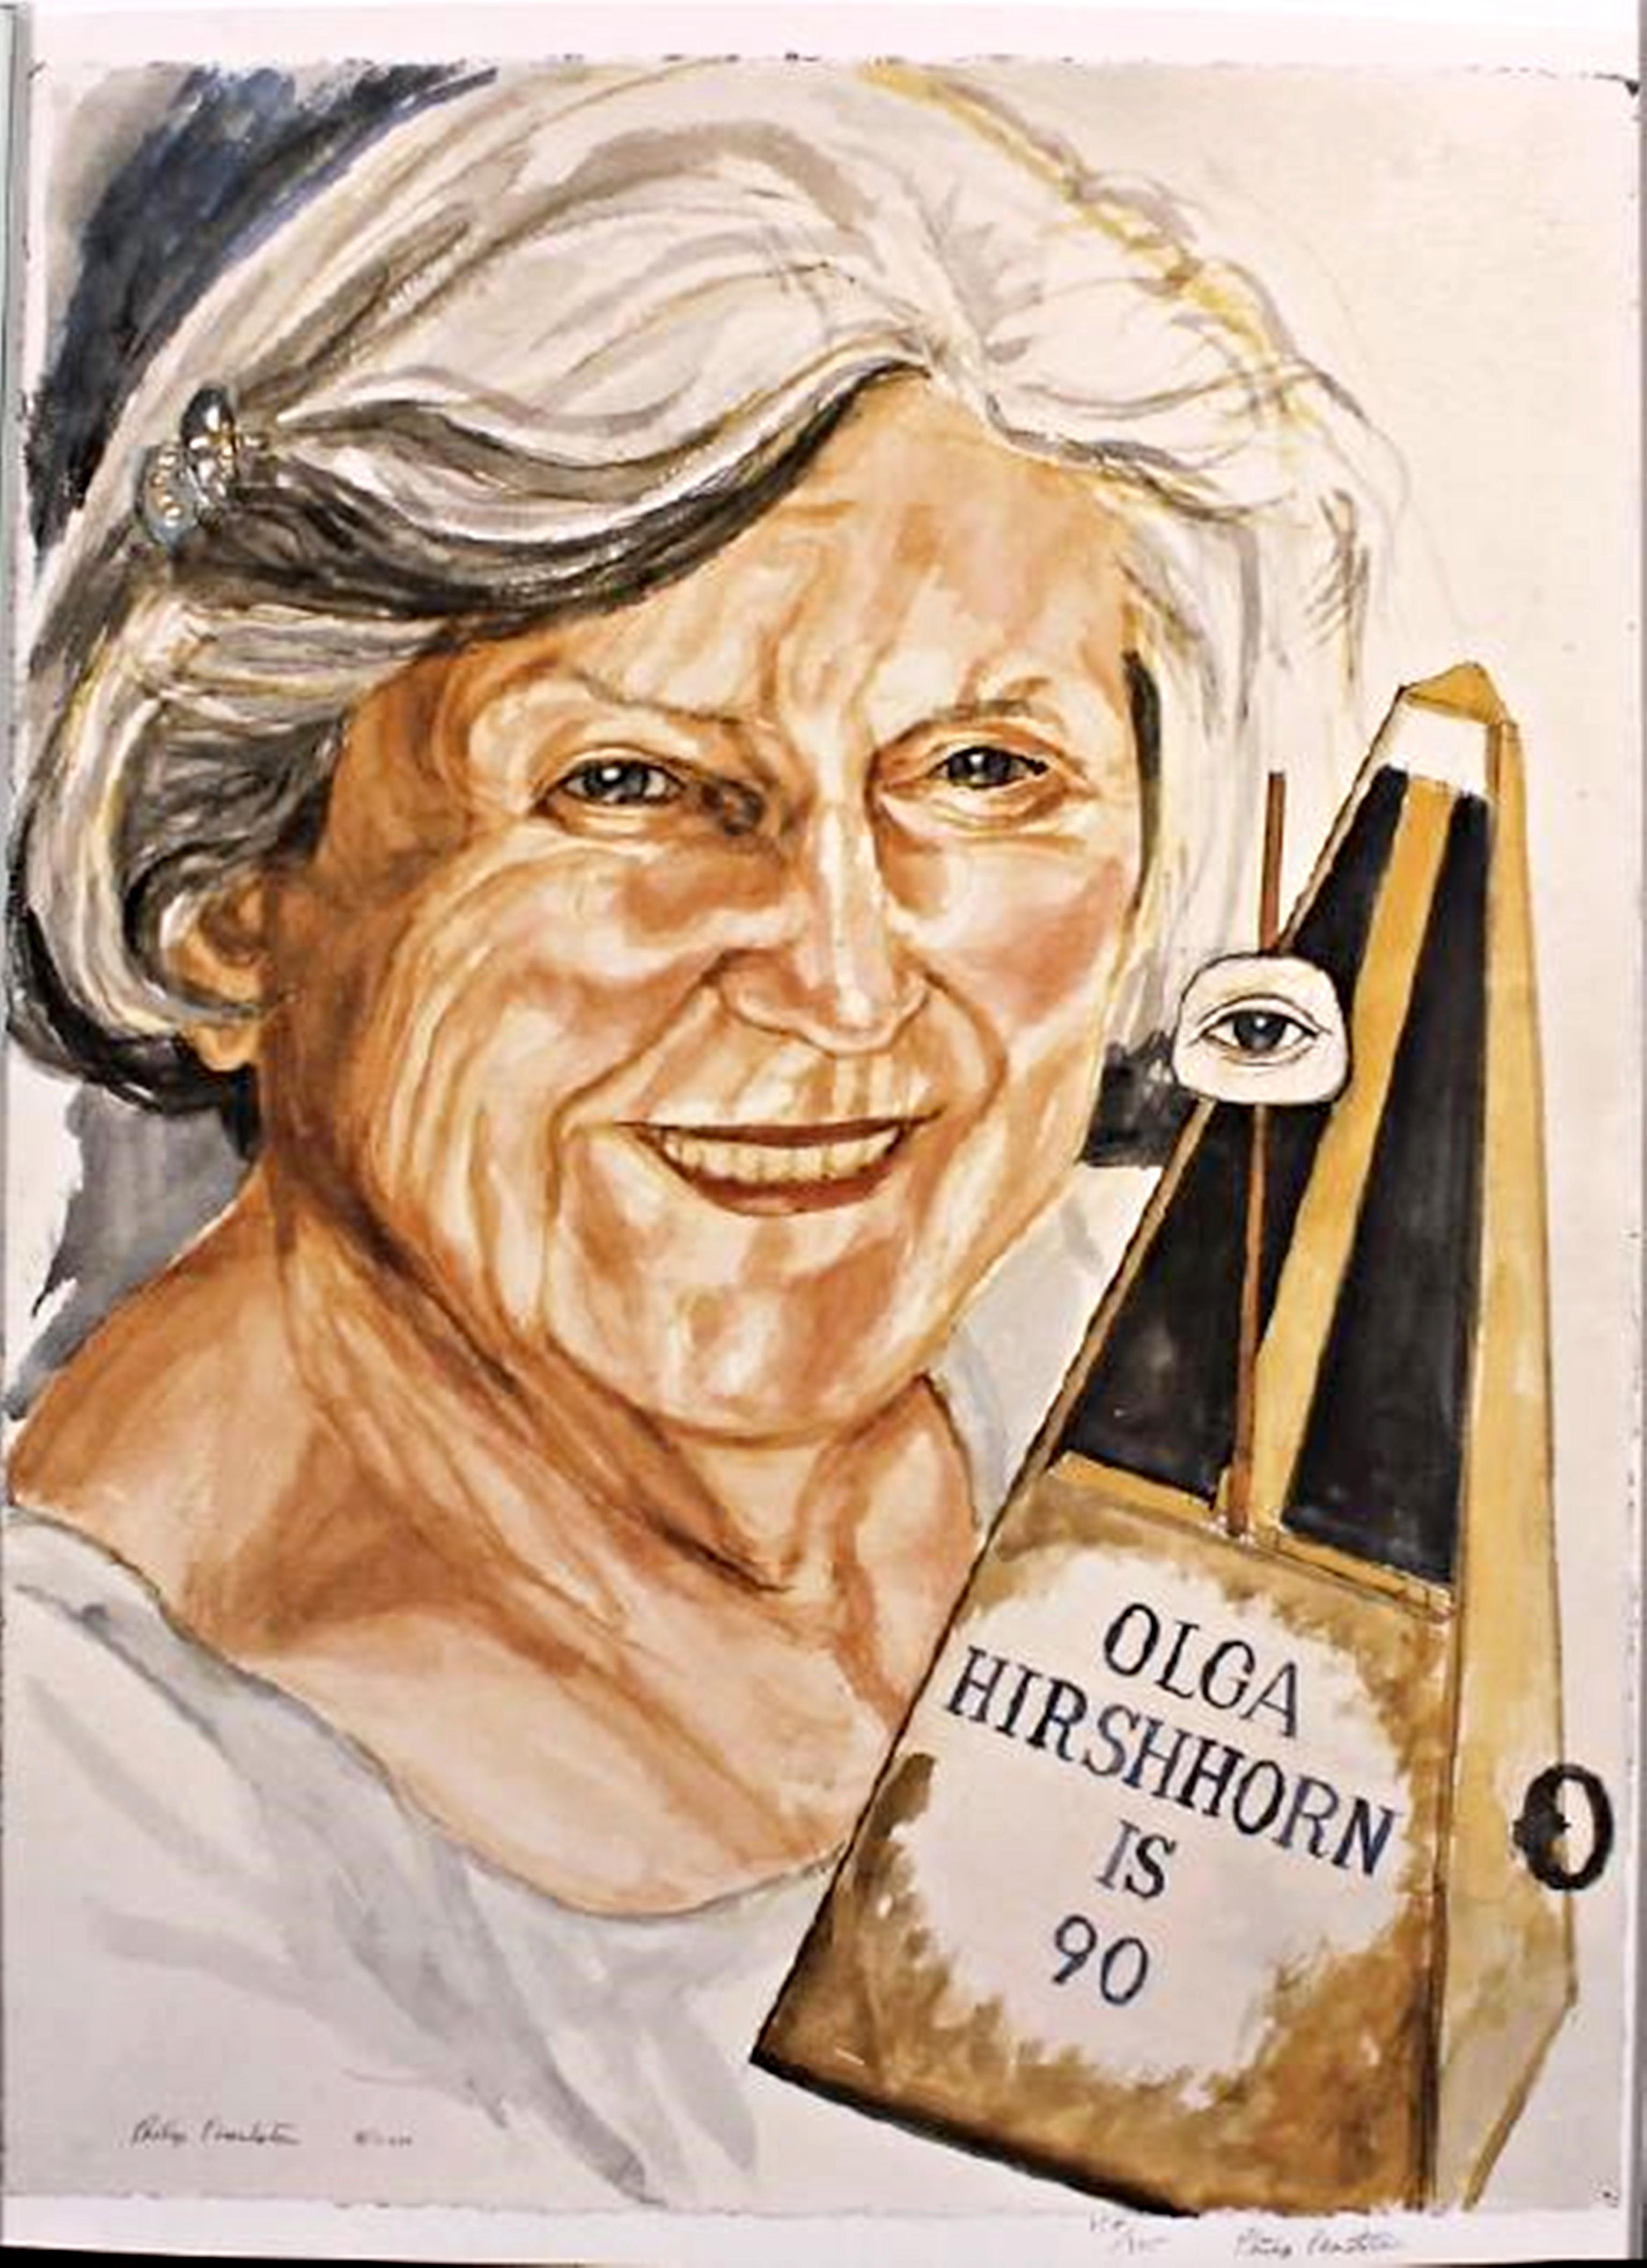 Olga Hirshhorn is 90, by world top realist artist, the late Philip Pearlstein